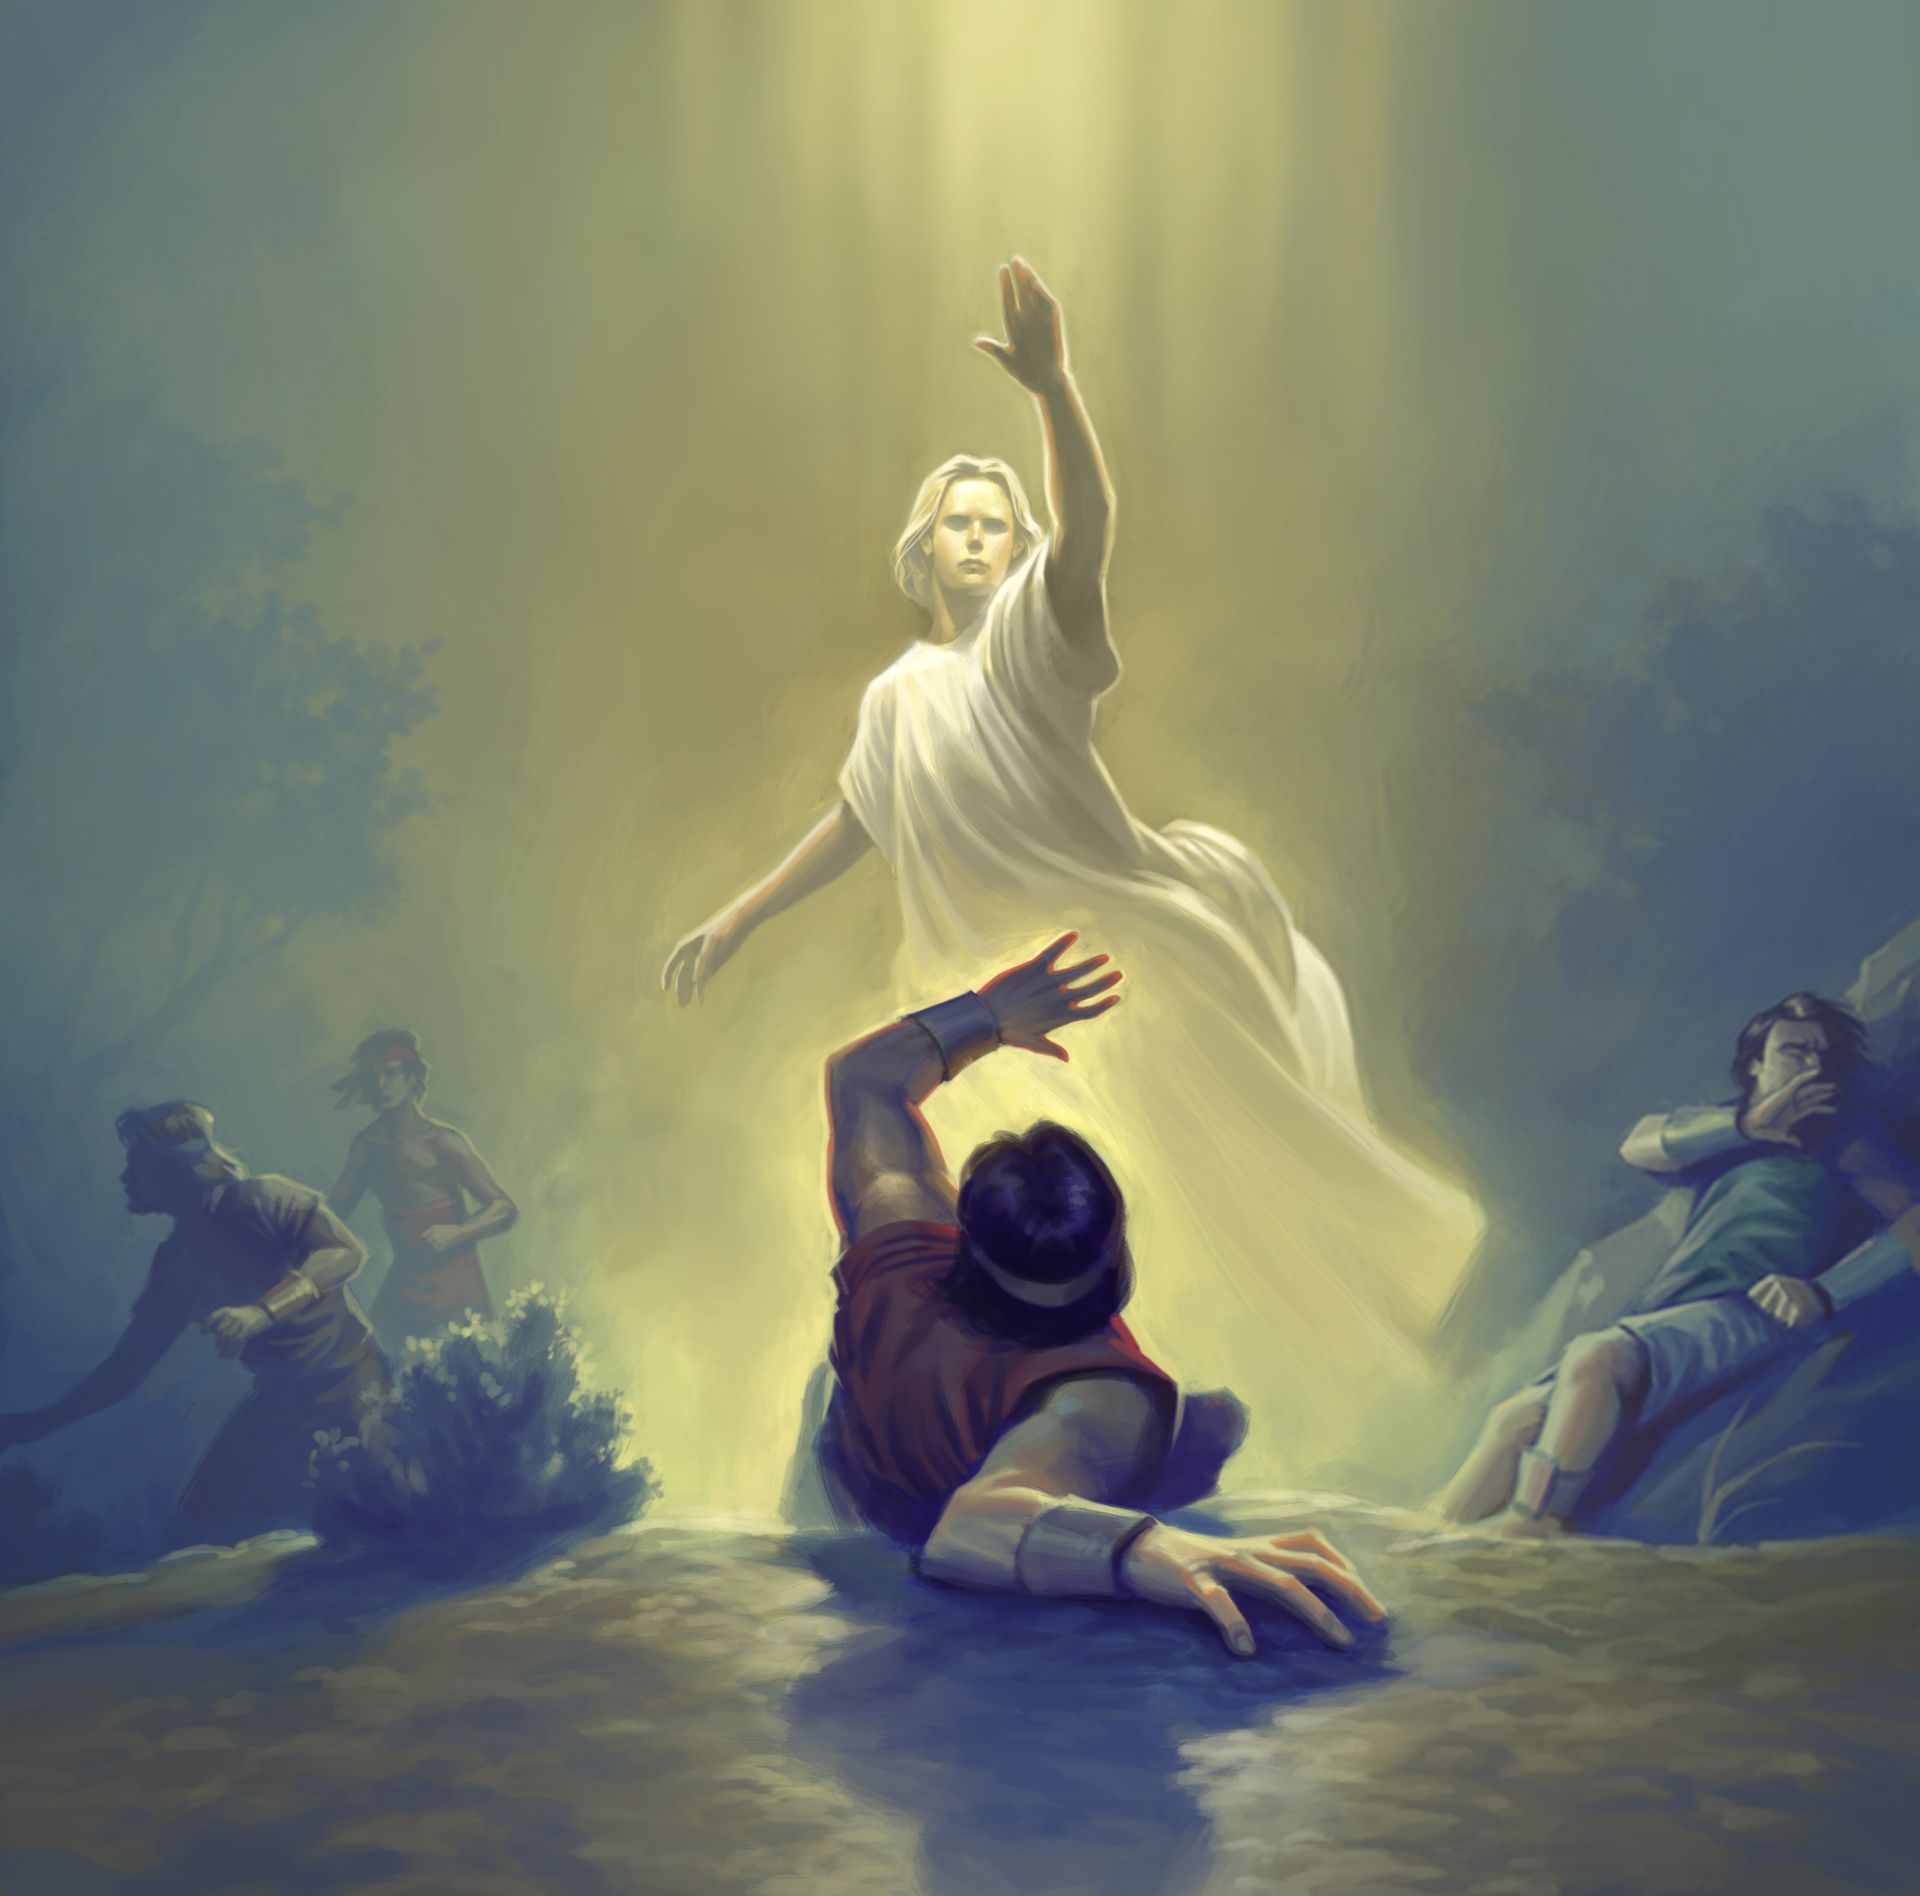 Remembering the Savior, by Kevin Keele